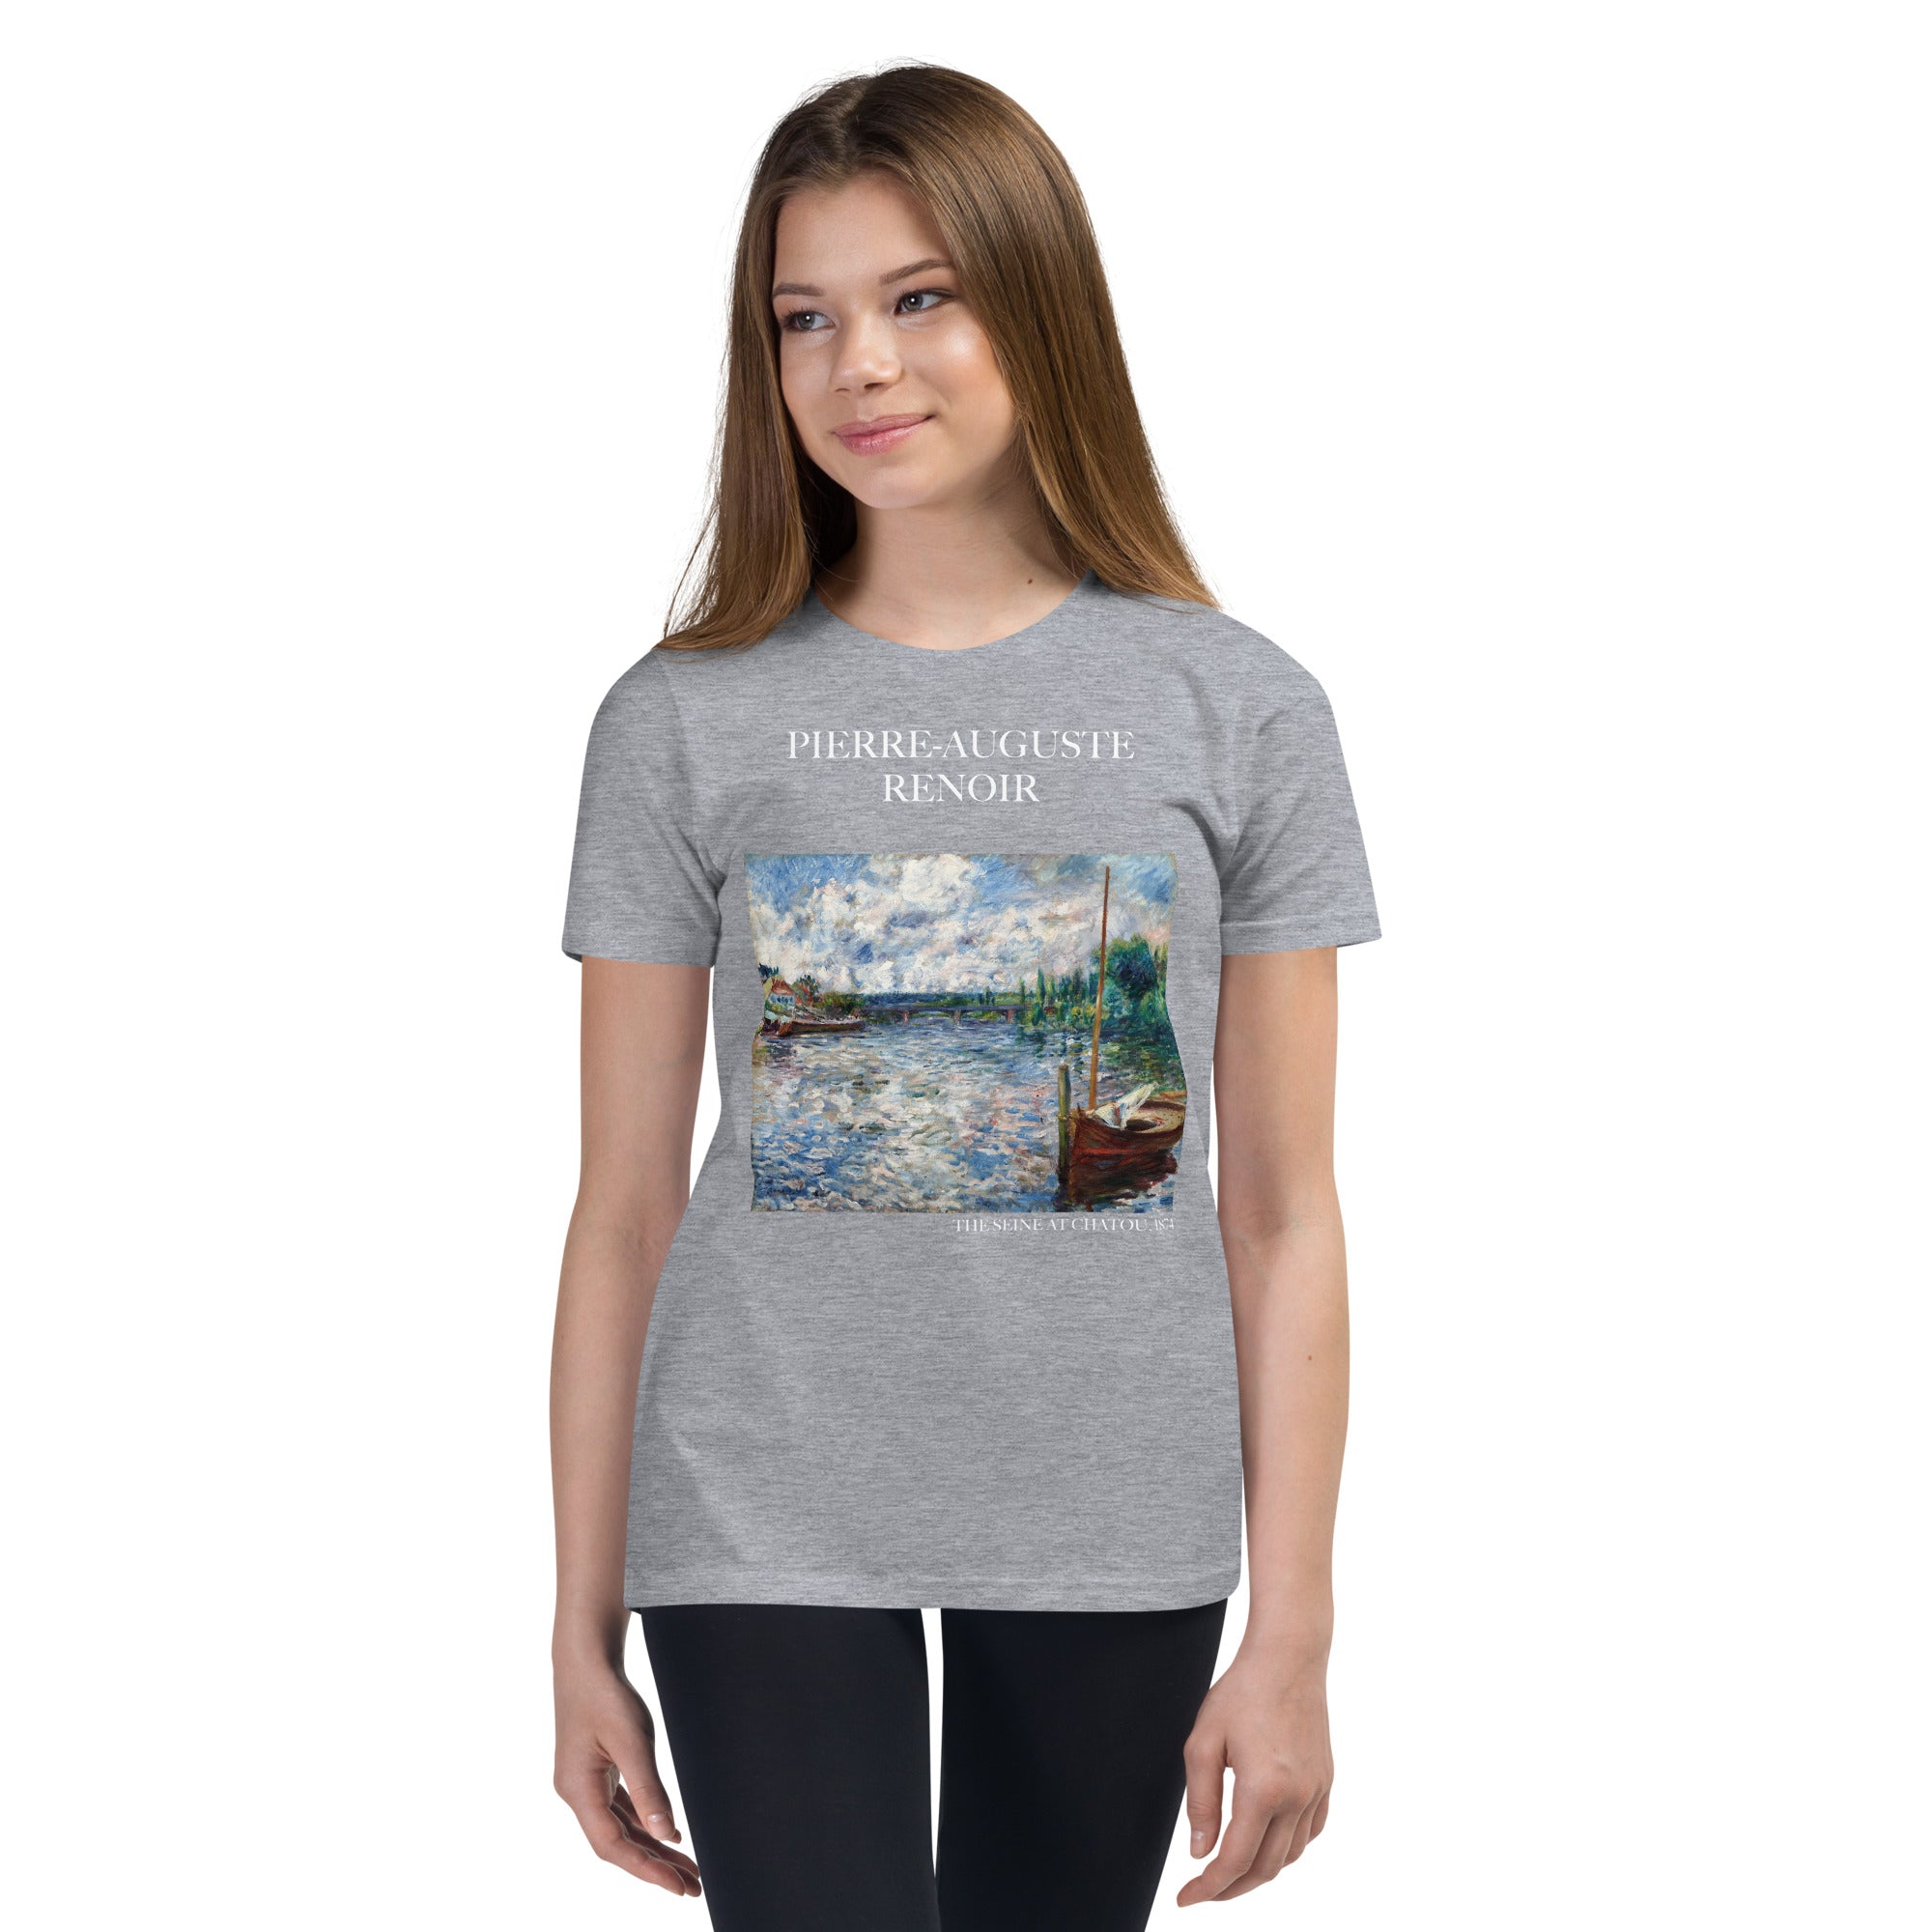 Pierre-Auguste Renoir 'The Seine at Chatou' Famous Painting Short Sleeve T-Shirt | Premium Youth Art Tee